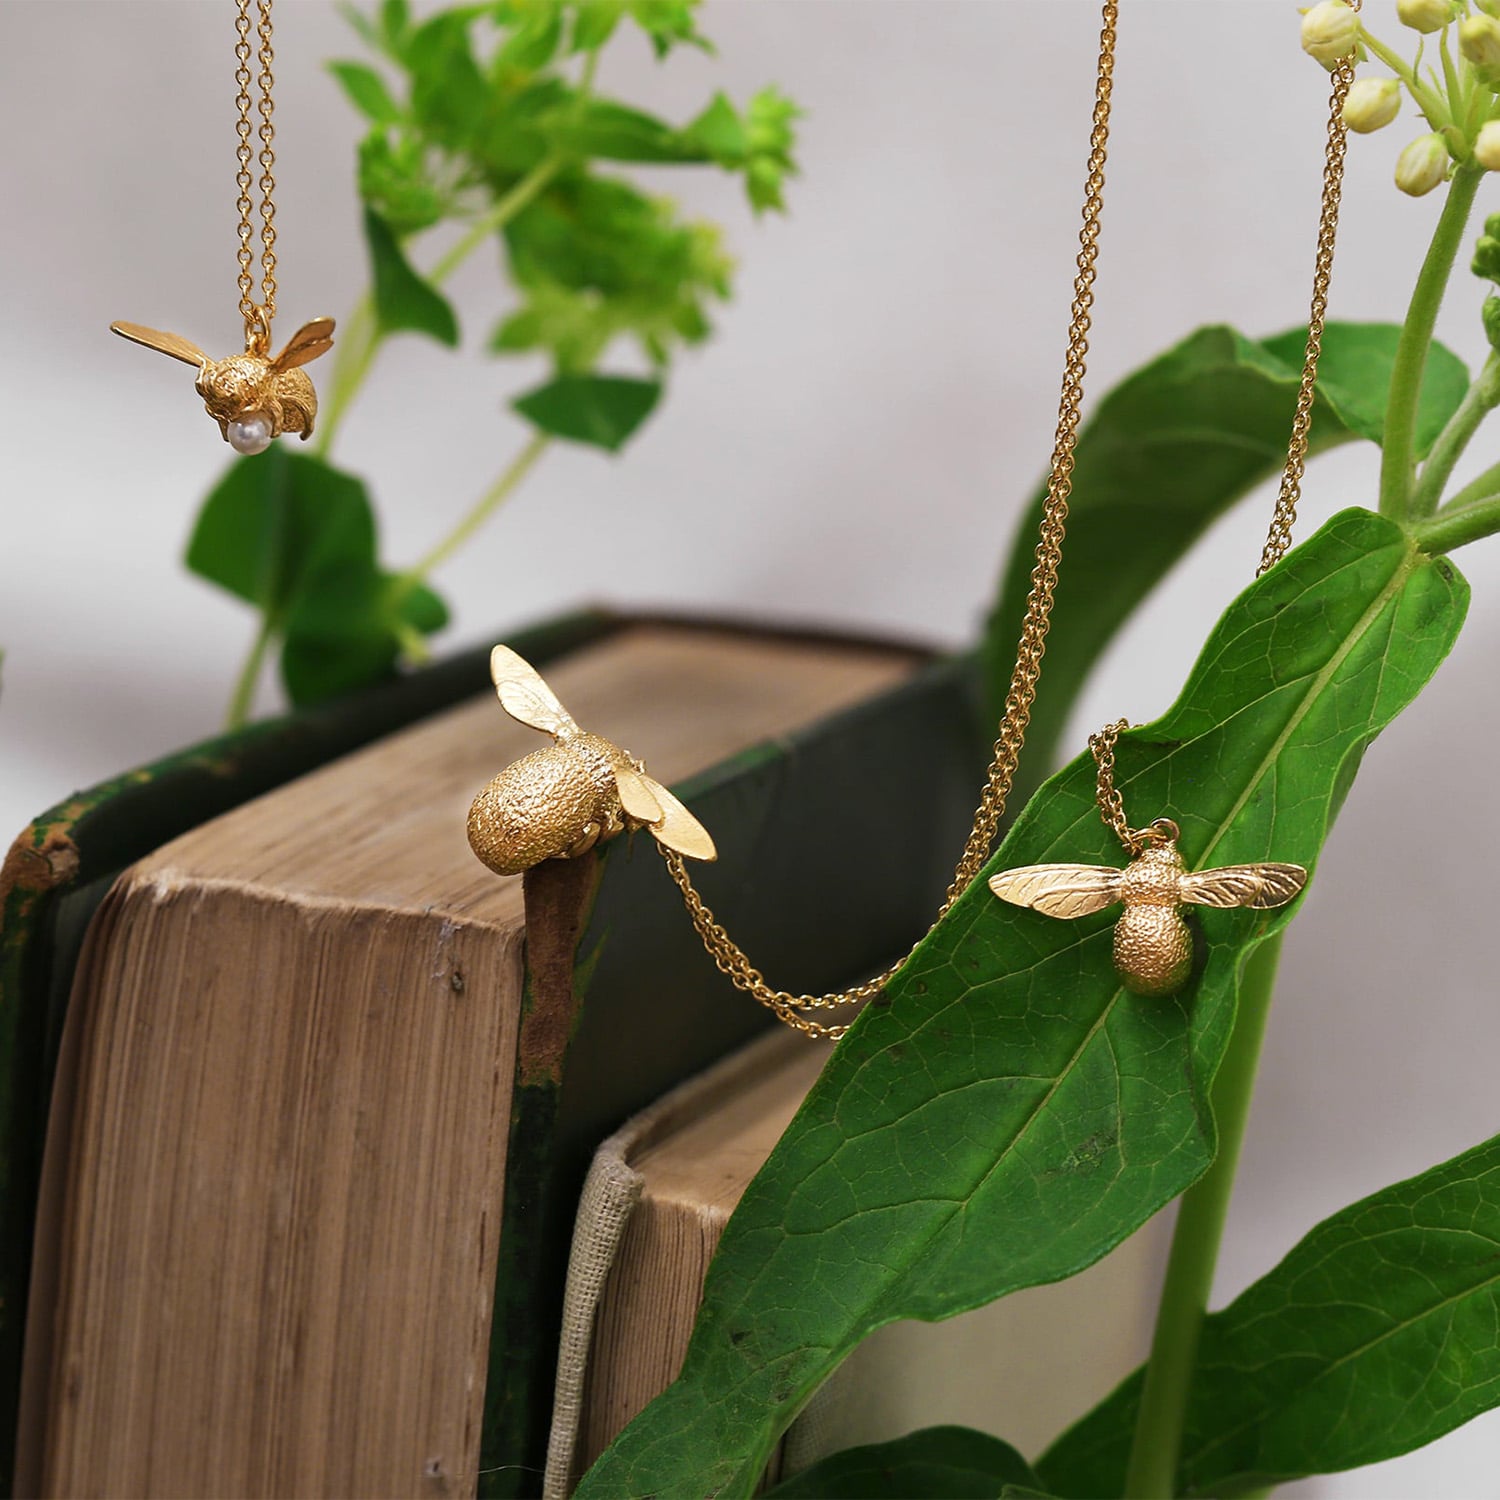 Lock and Key Necklace gold plated silver with black seed pearls displayed on vintage books with peach coloured flower